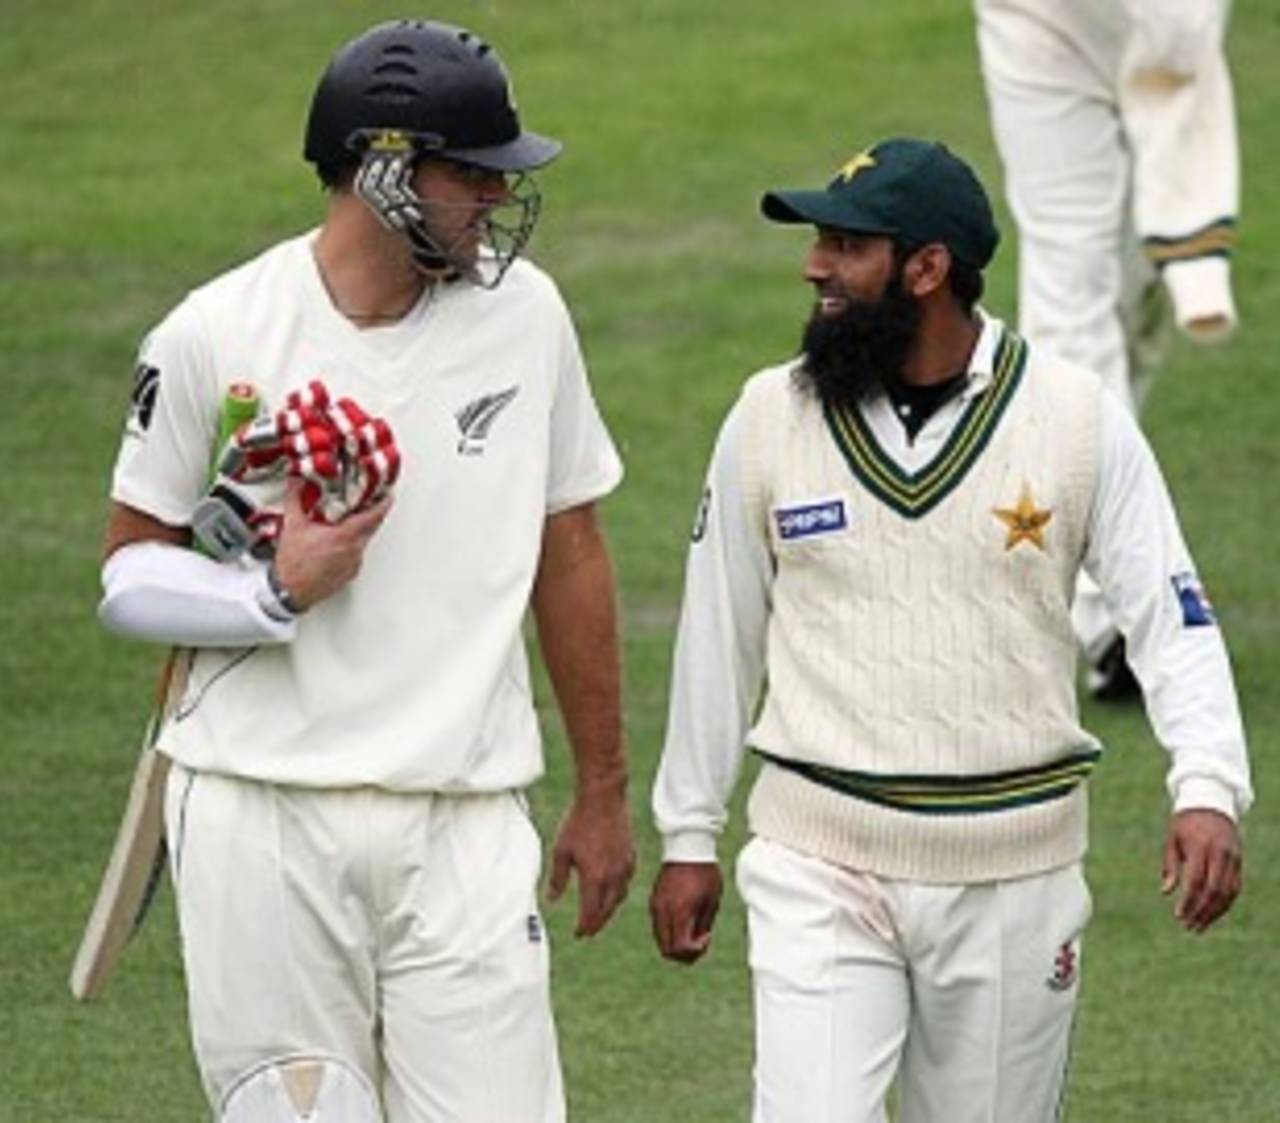 The rival captains have a word before walking off for lunch, New Zealand v Pakistan, 1st Test, Dunedin, 2nd day, November 25, 2009